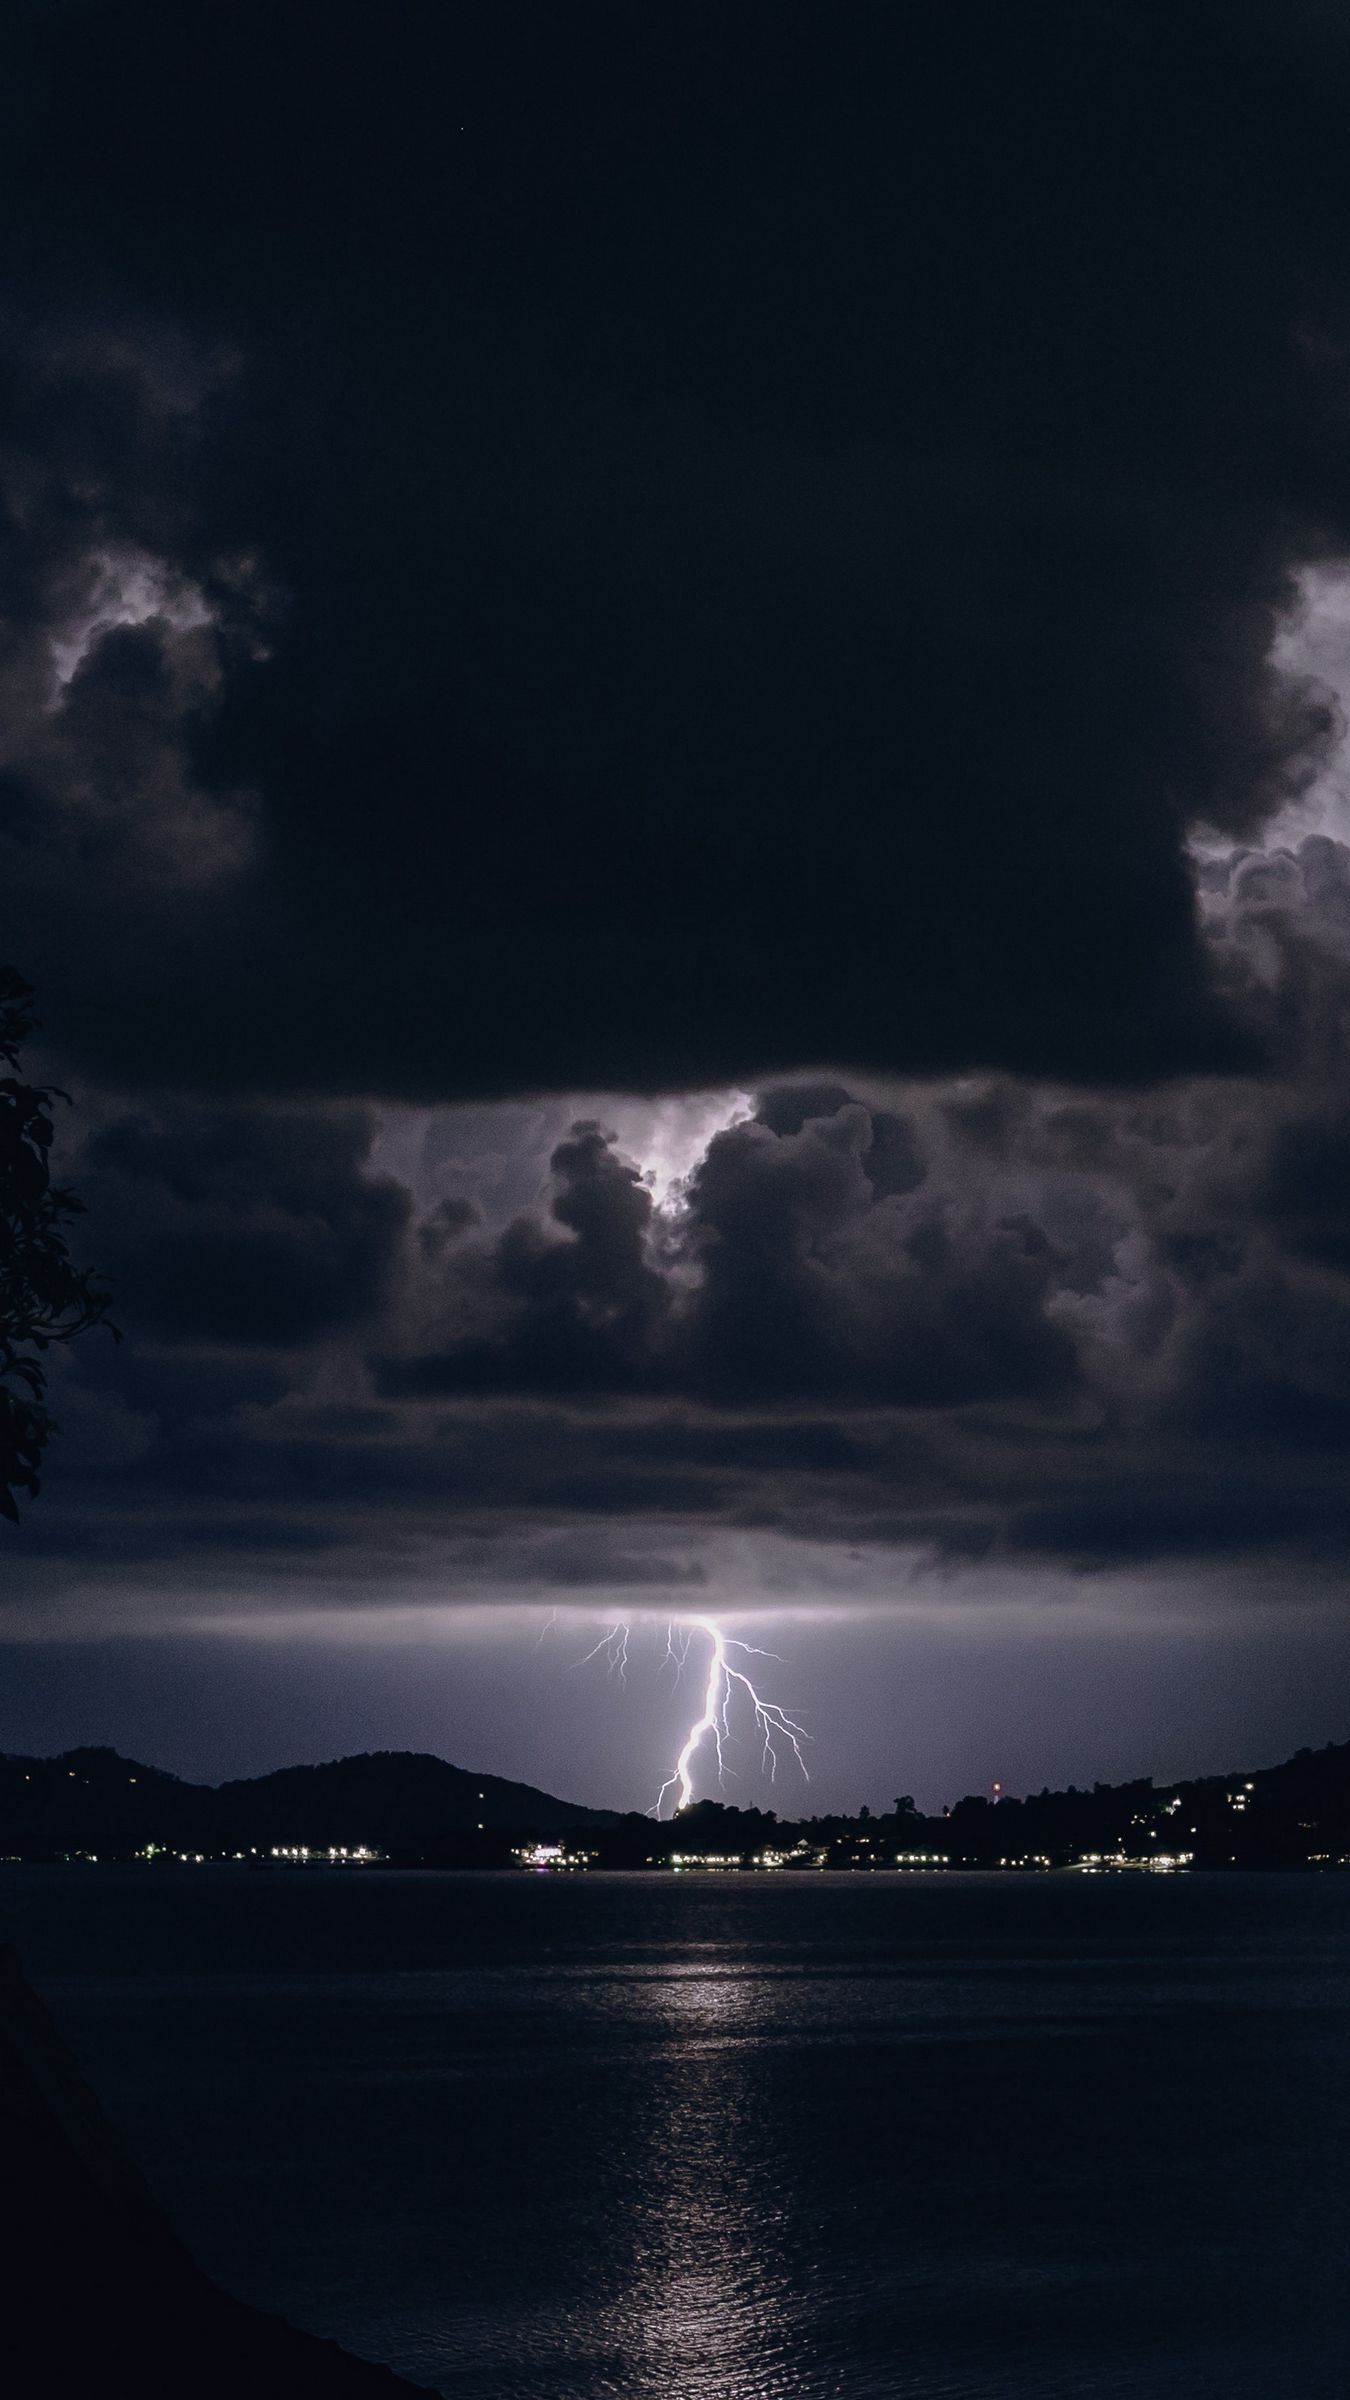 Download wallpaper 1350x2400 lightning, night, overcast, clouds, river iphone 8+/7+/6s+/for parallax HD background